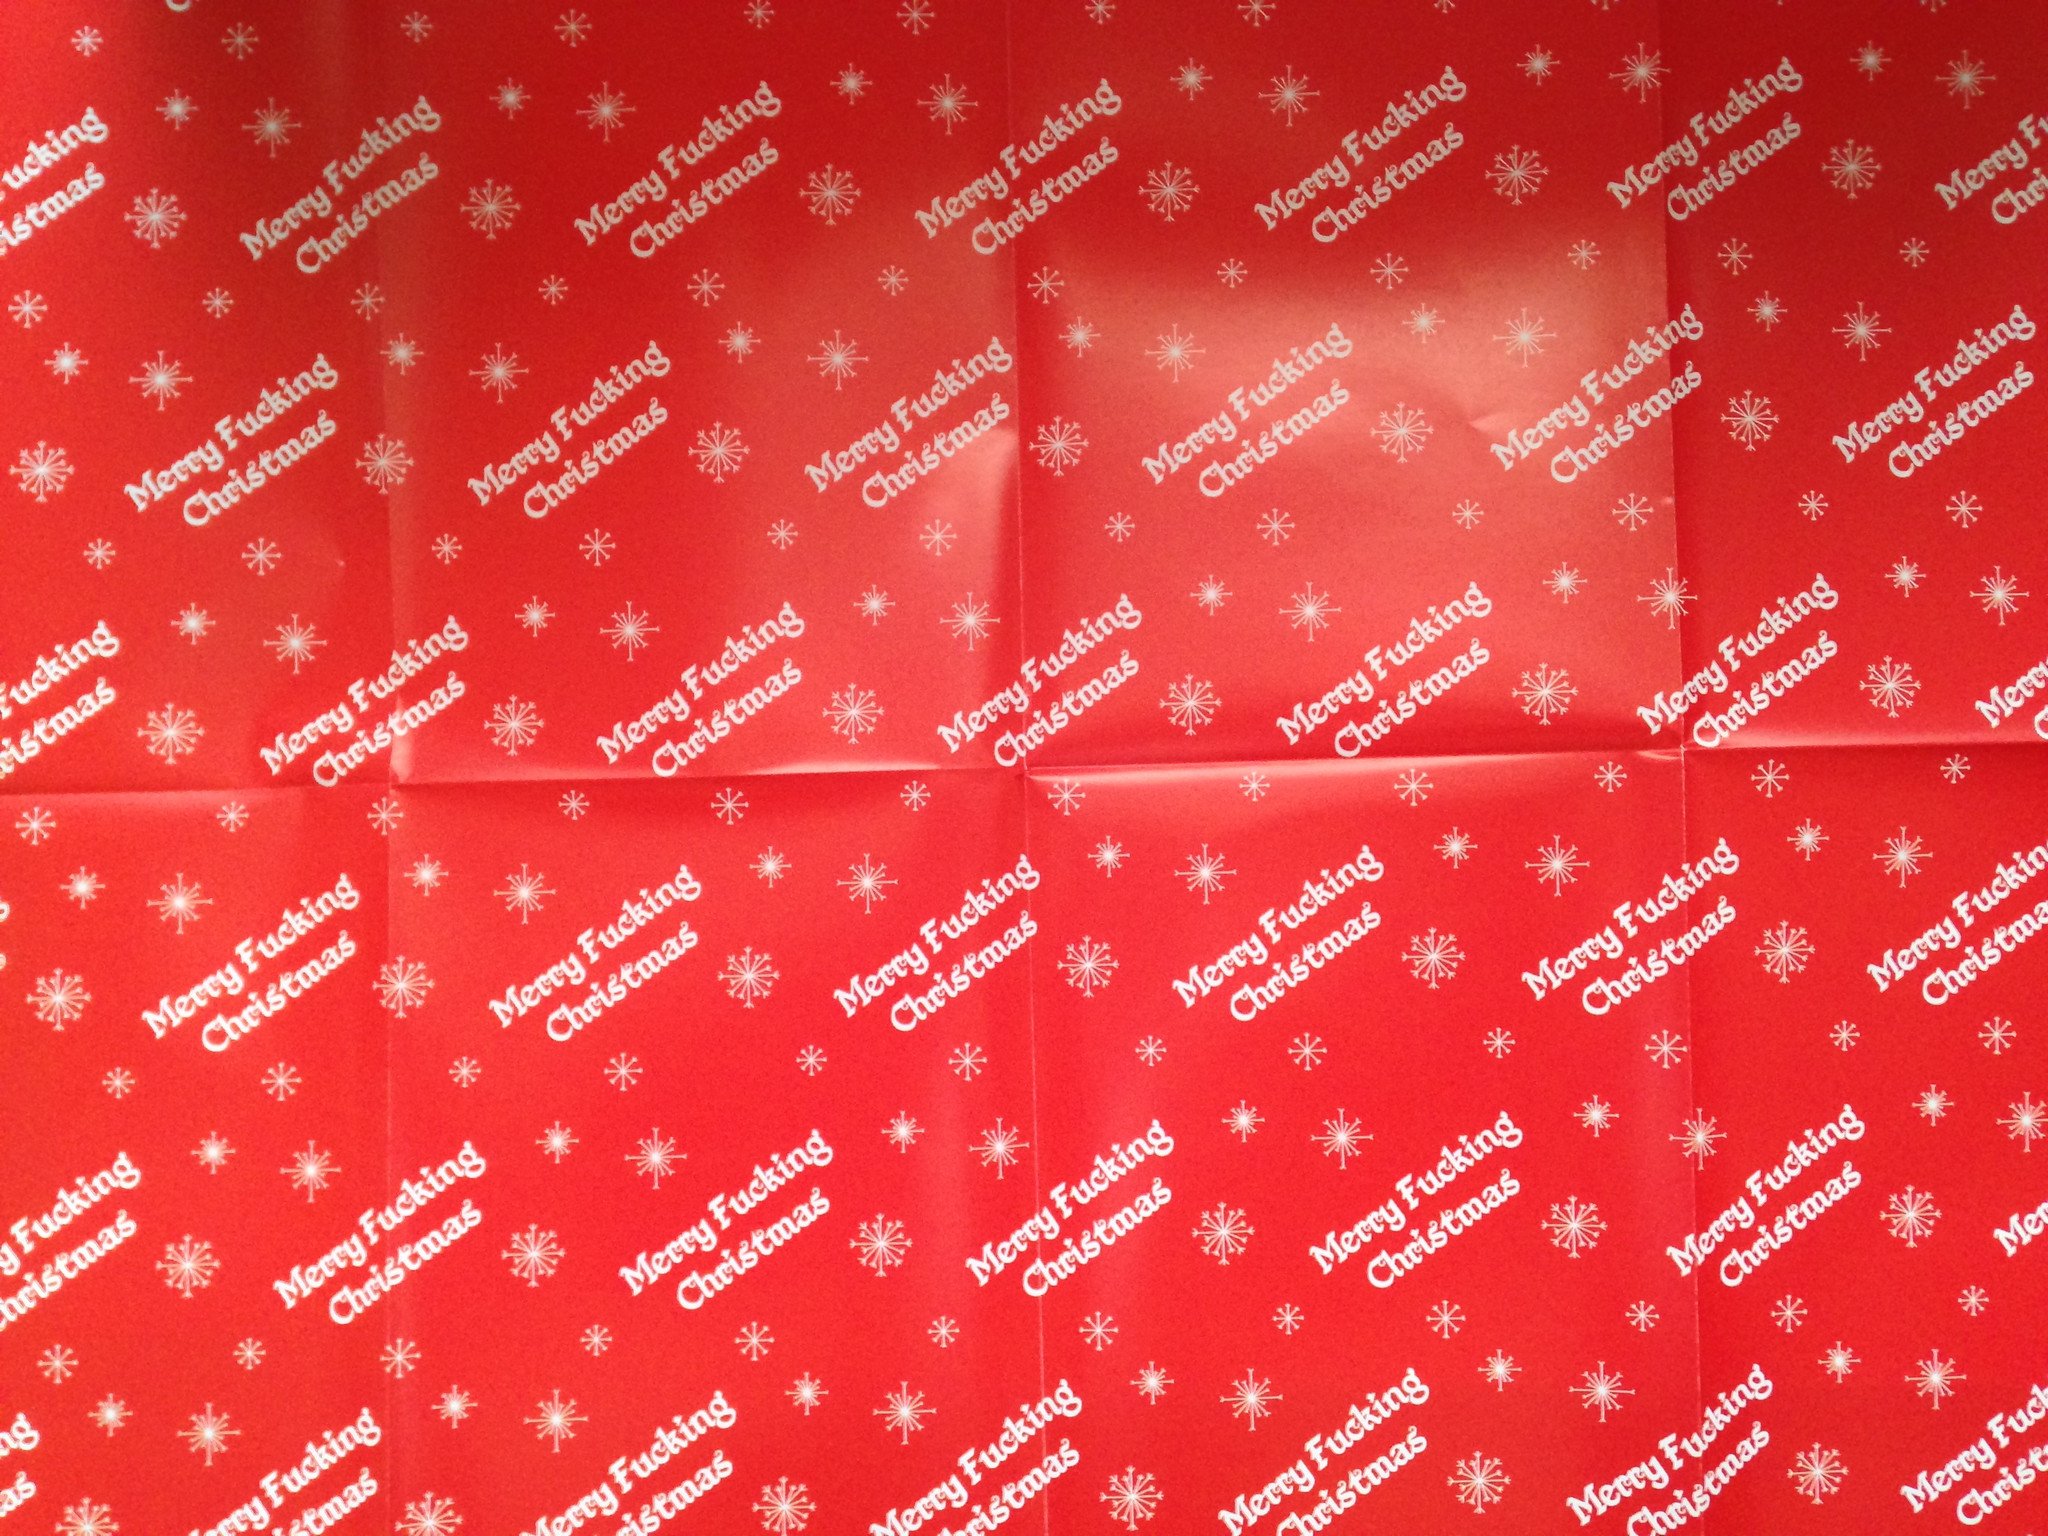 Merry fucking Christmas wrapping paper pack - Phuckadoodledoo